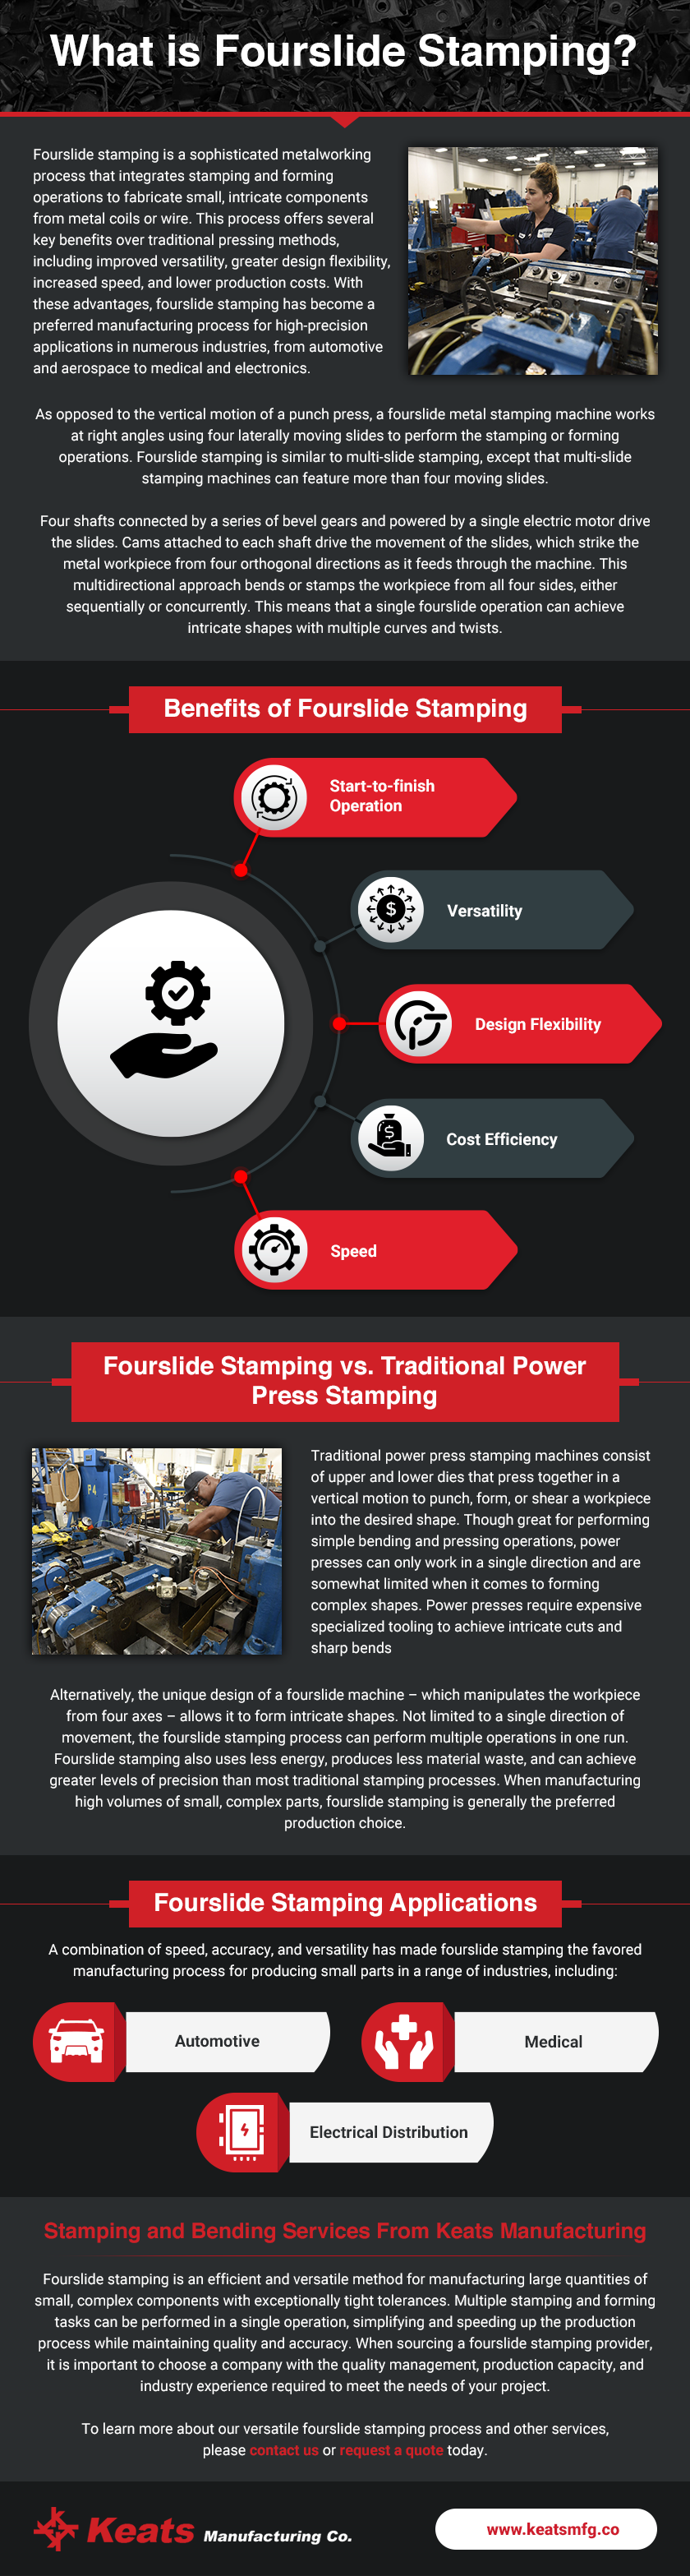 What is Fourslide Stamping